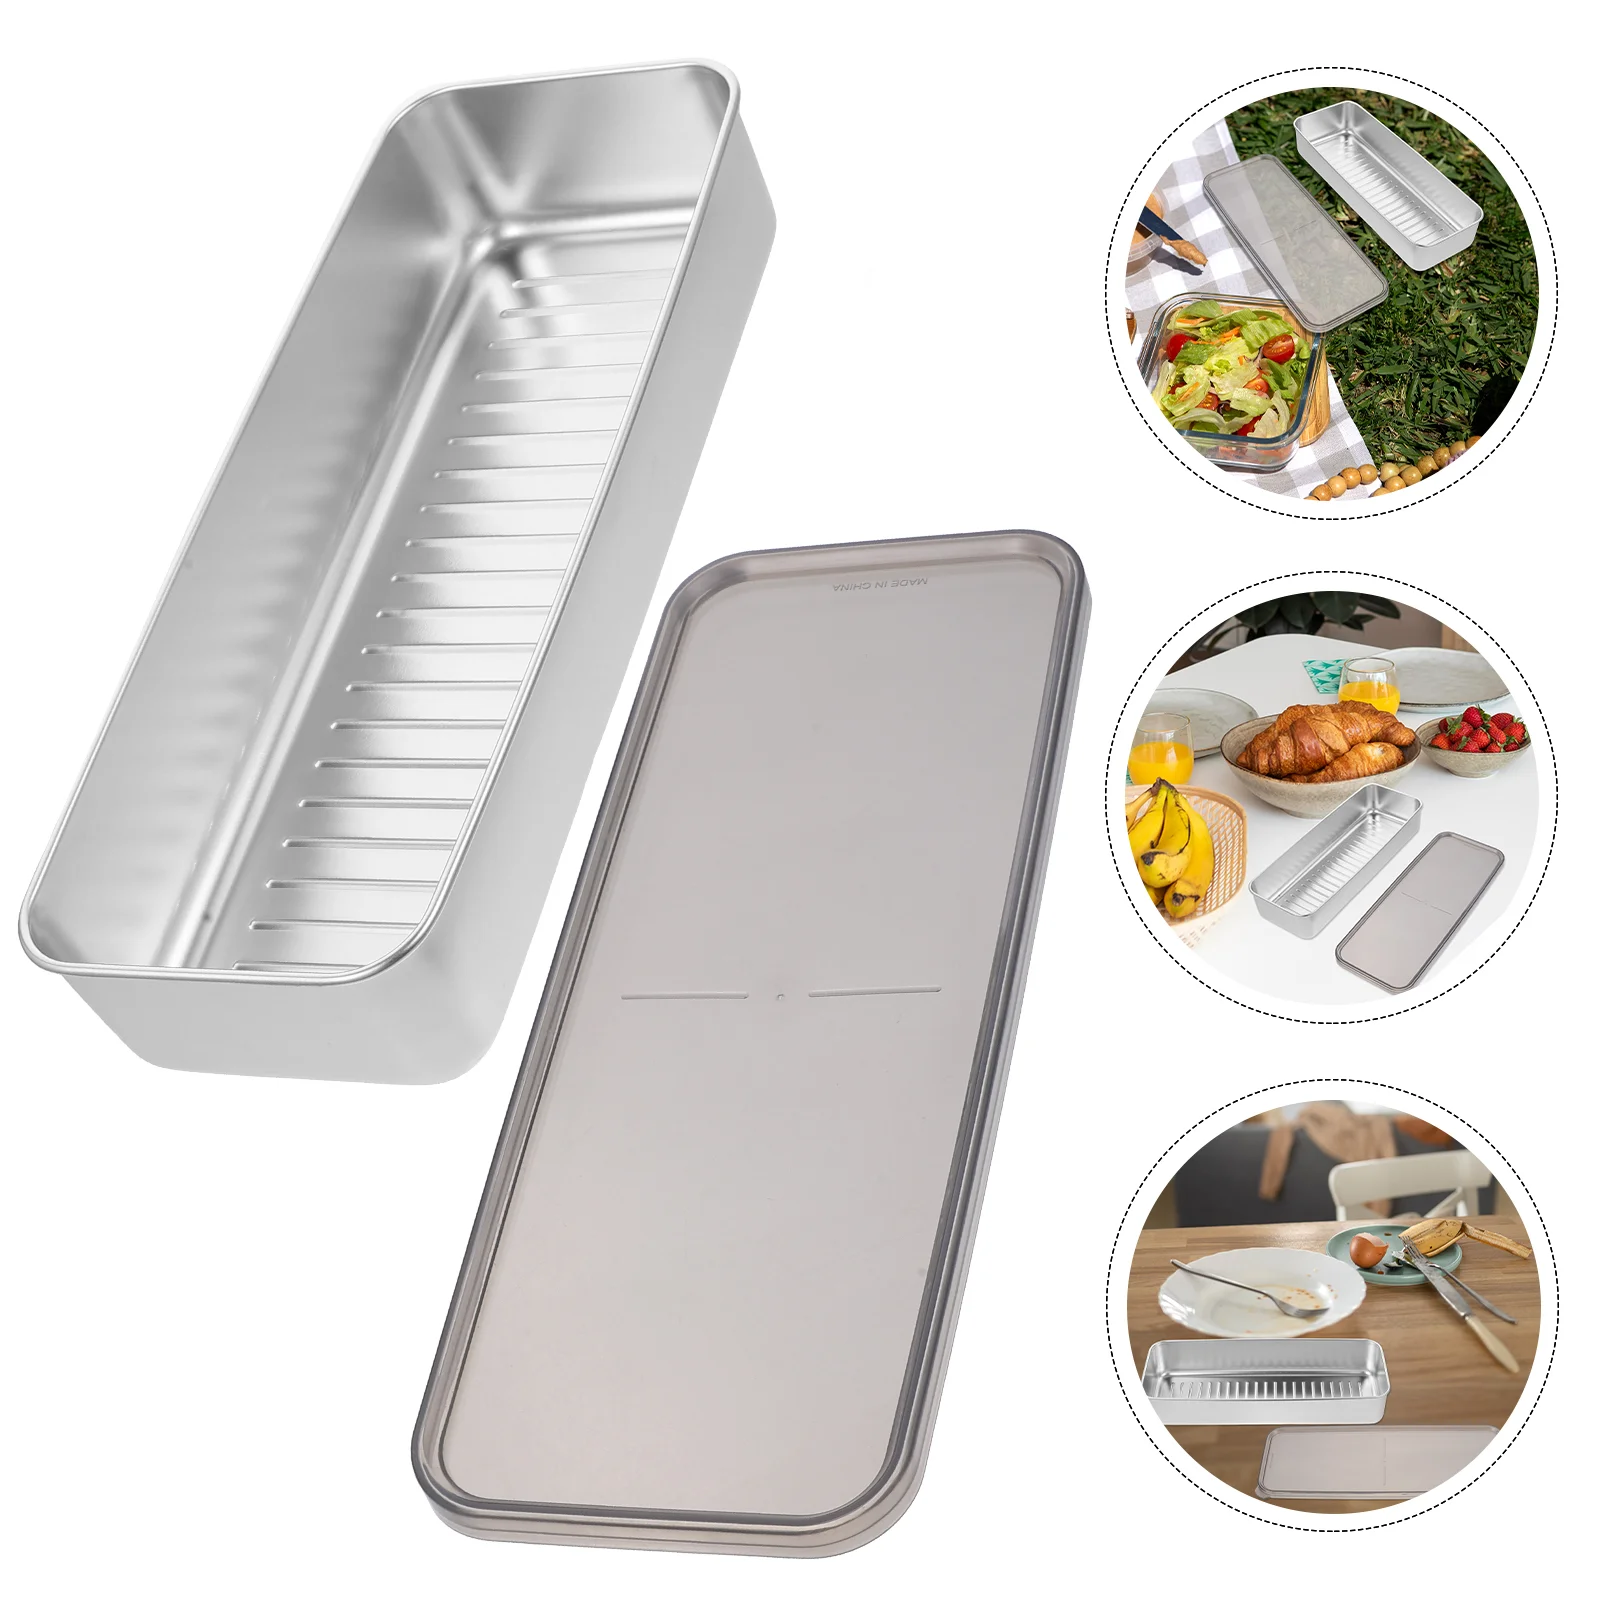 

Stainless Steel Crisper Food Container Refrigerator Meat Storage Box Bacon Saver Containers Fridge